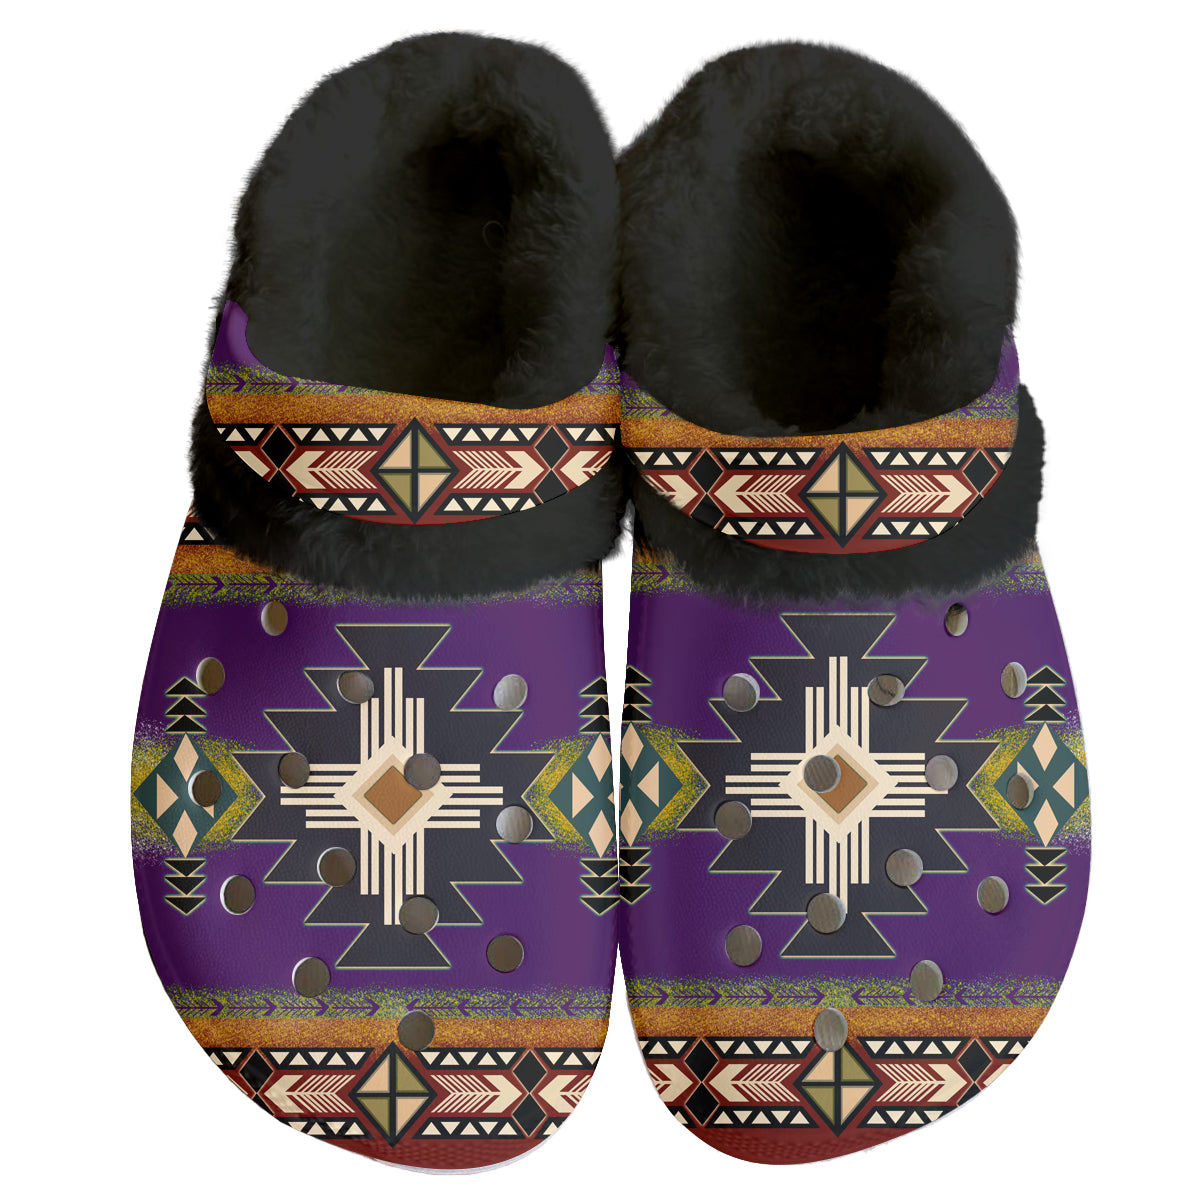 Powwow Storegb nat0001 04 pattern native american classic clogs with fleece shoes